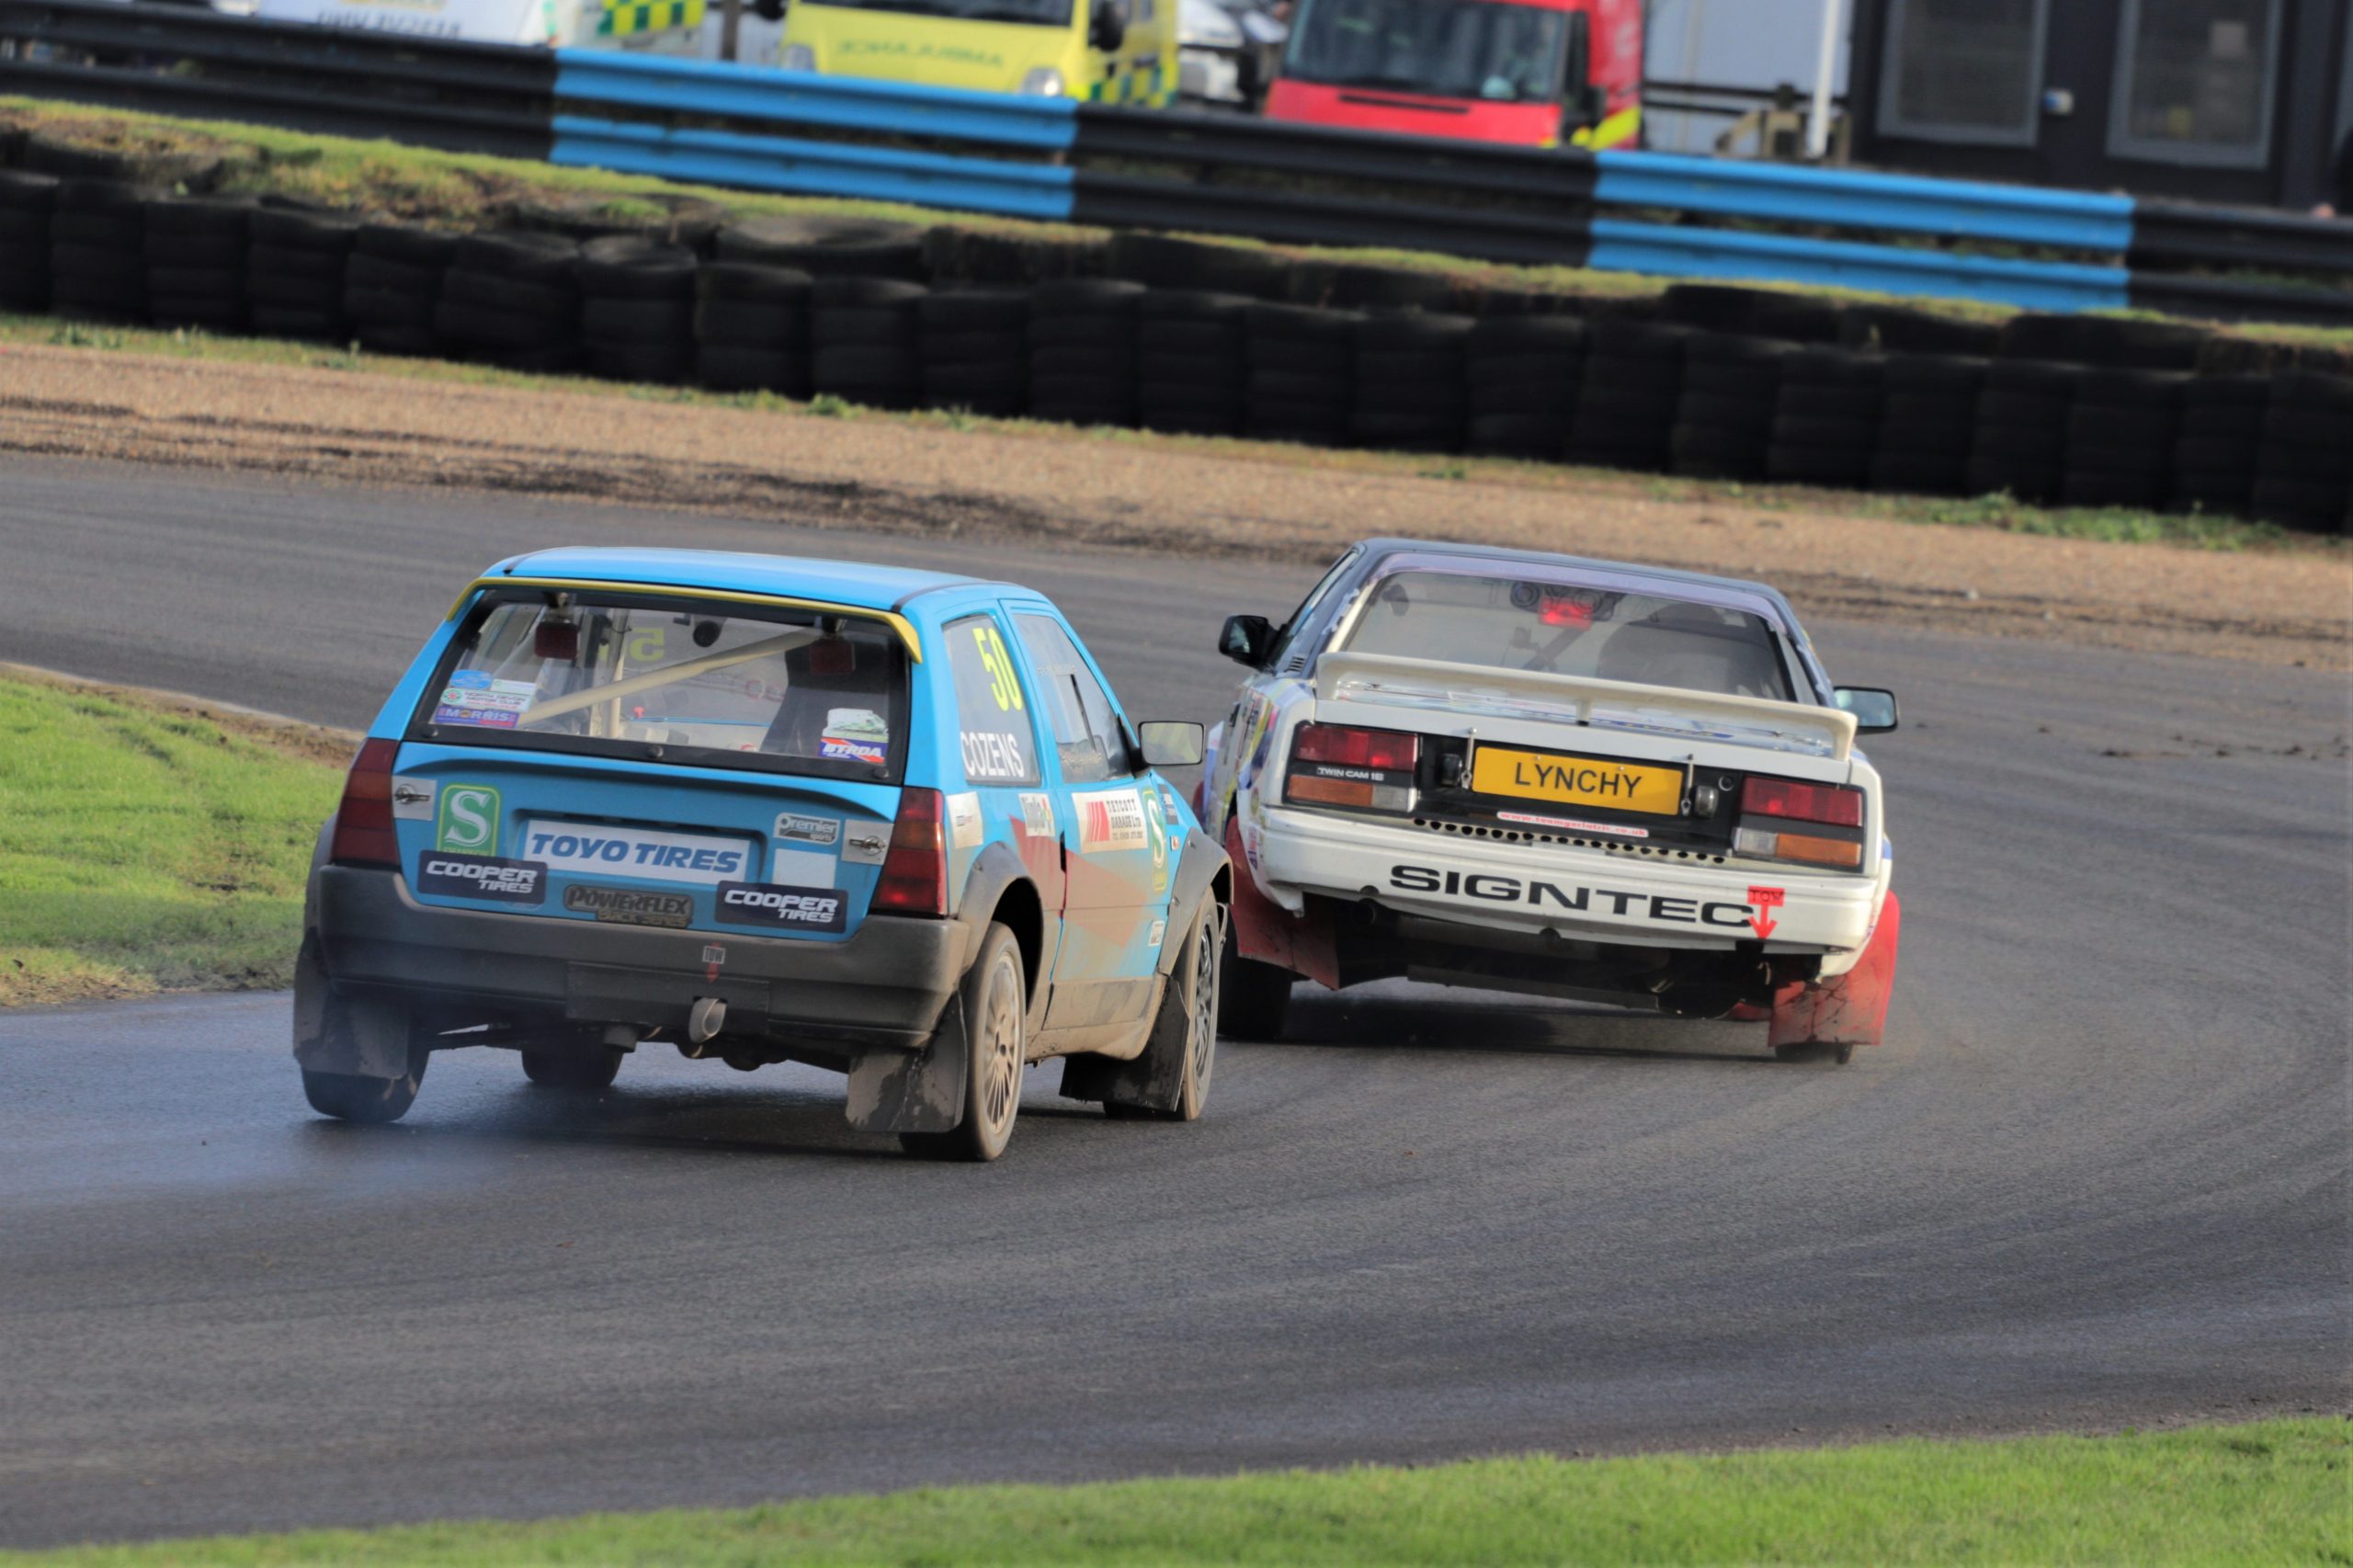 Mixed fortunes for Tony Lynch at Lydden